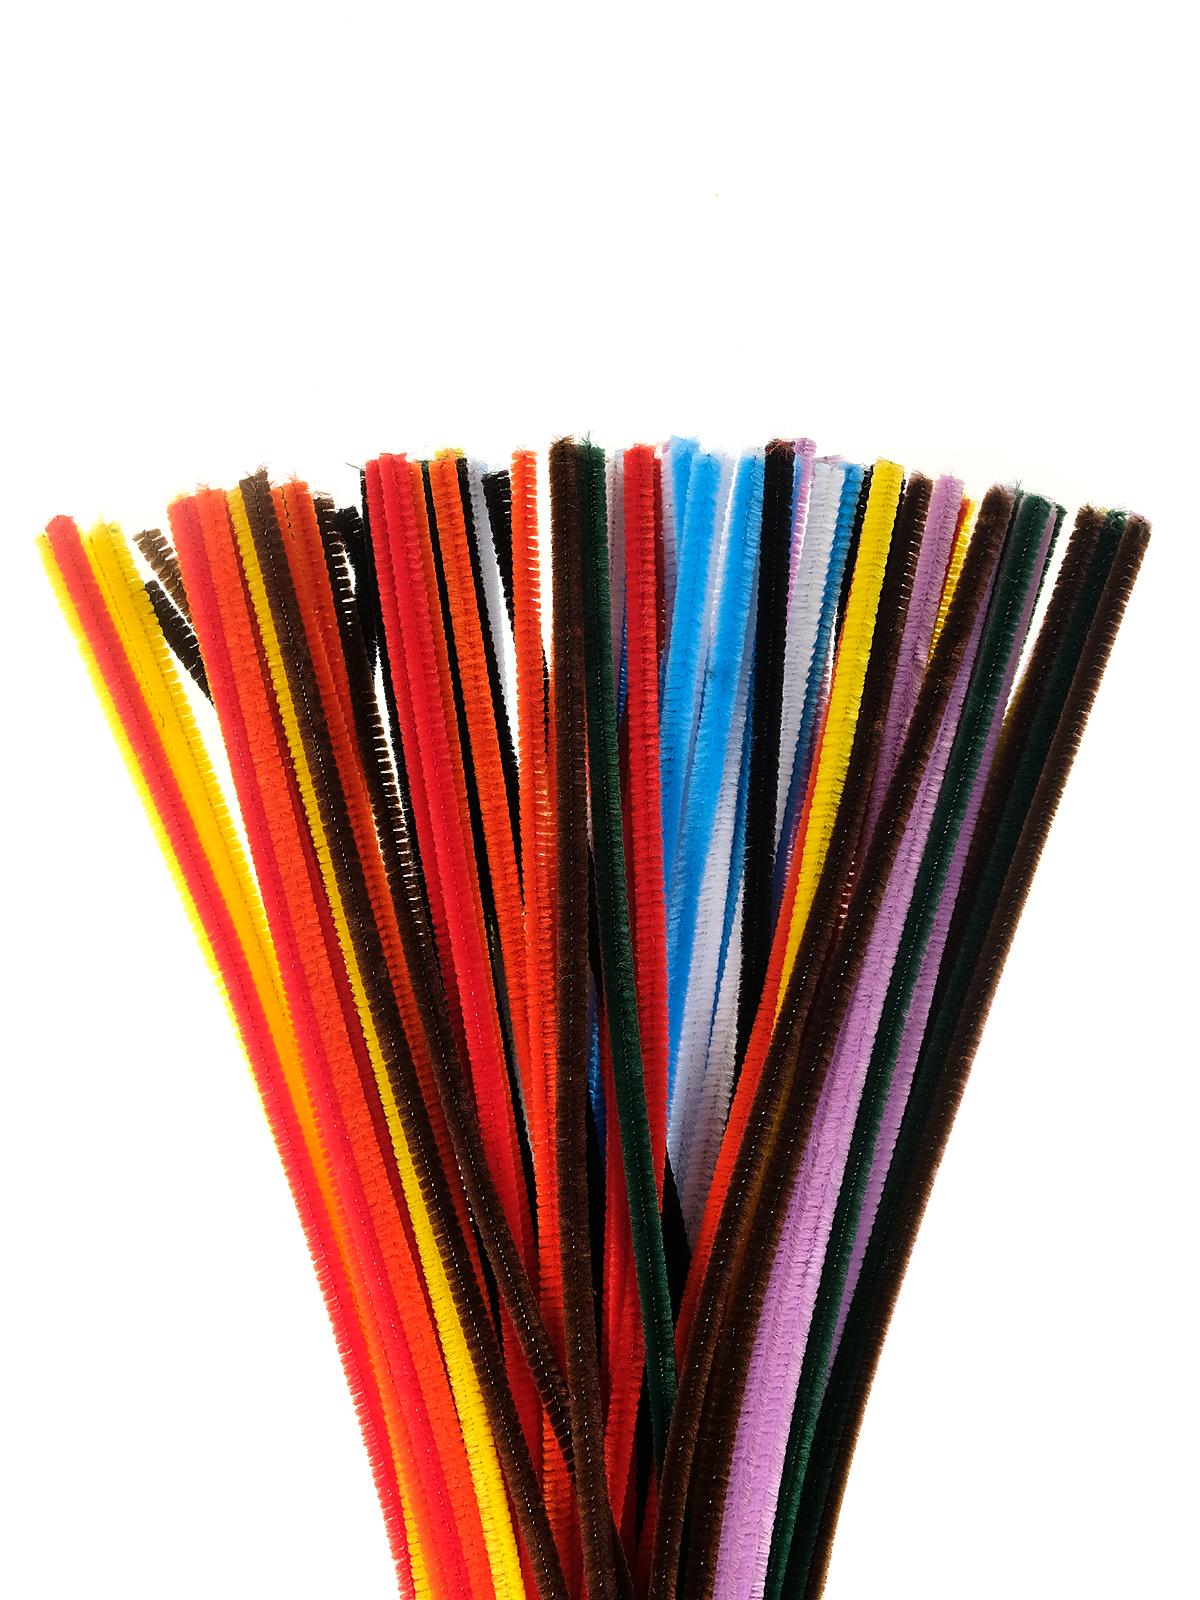 Chenille Stems 6 Mm X 12 In. 100 Pieces Assorted